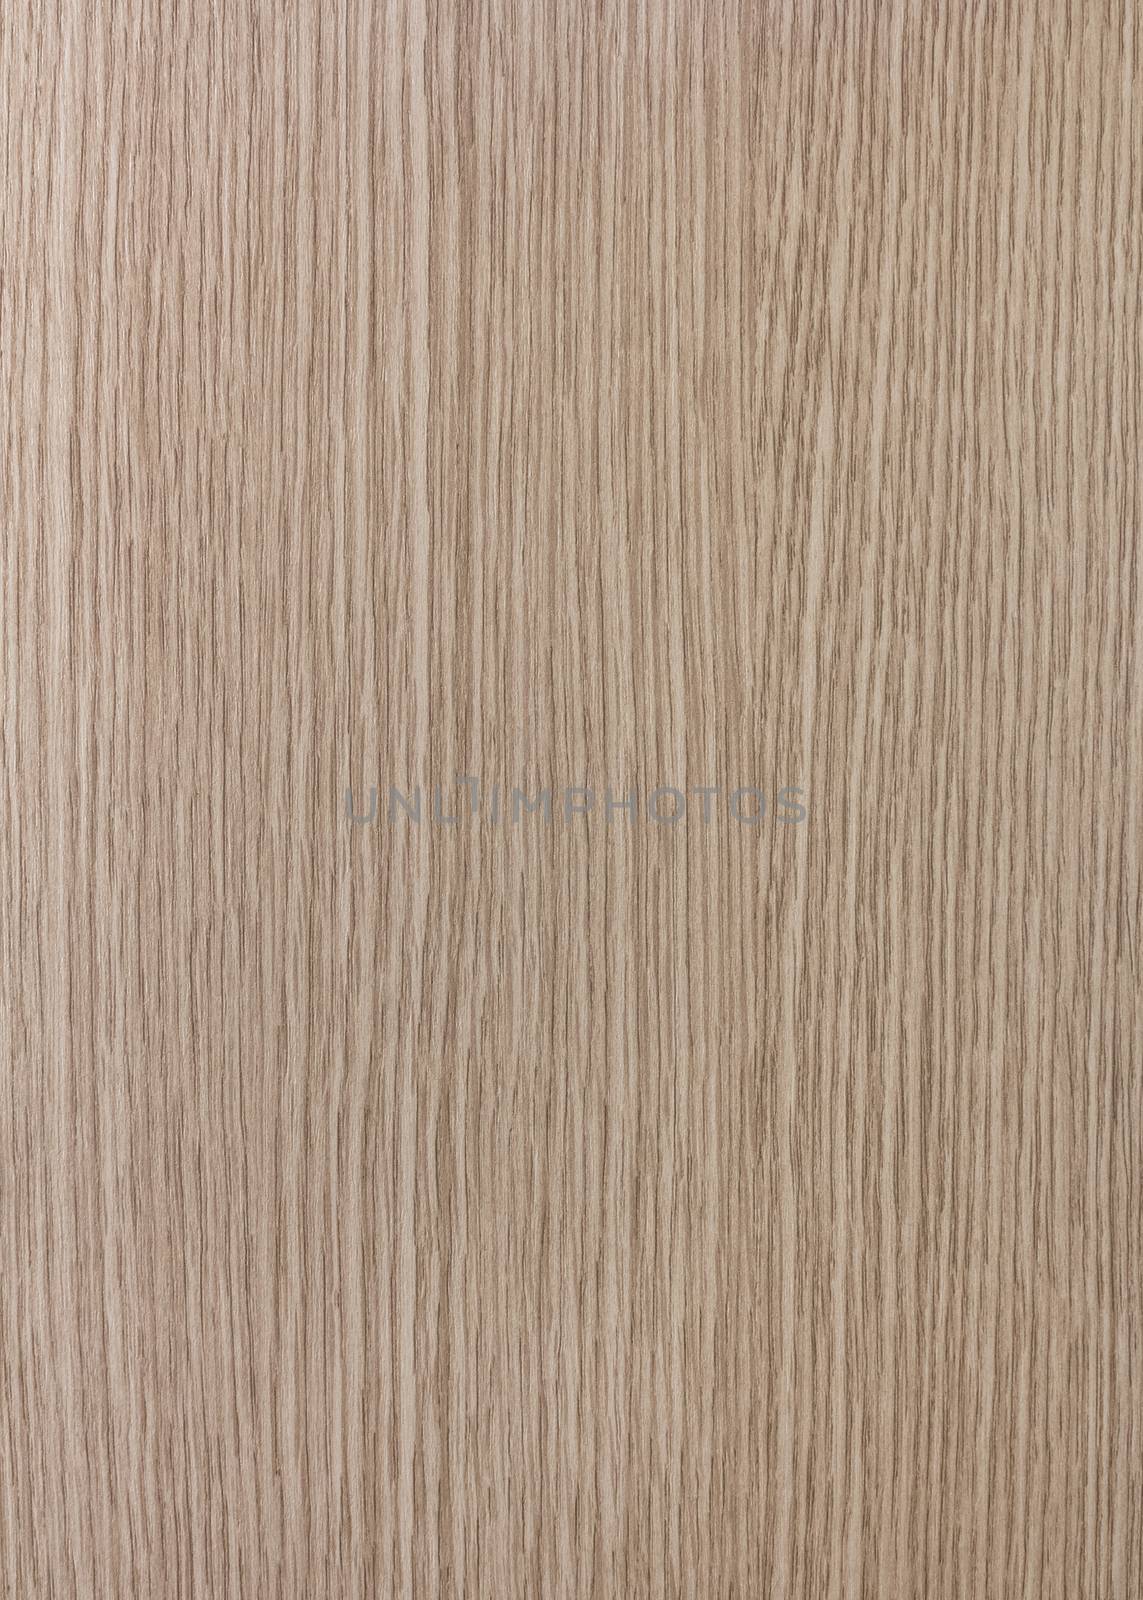 Wood texture with natural vertical pattern.